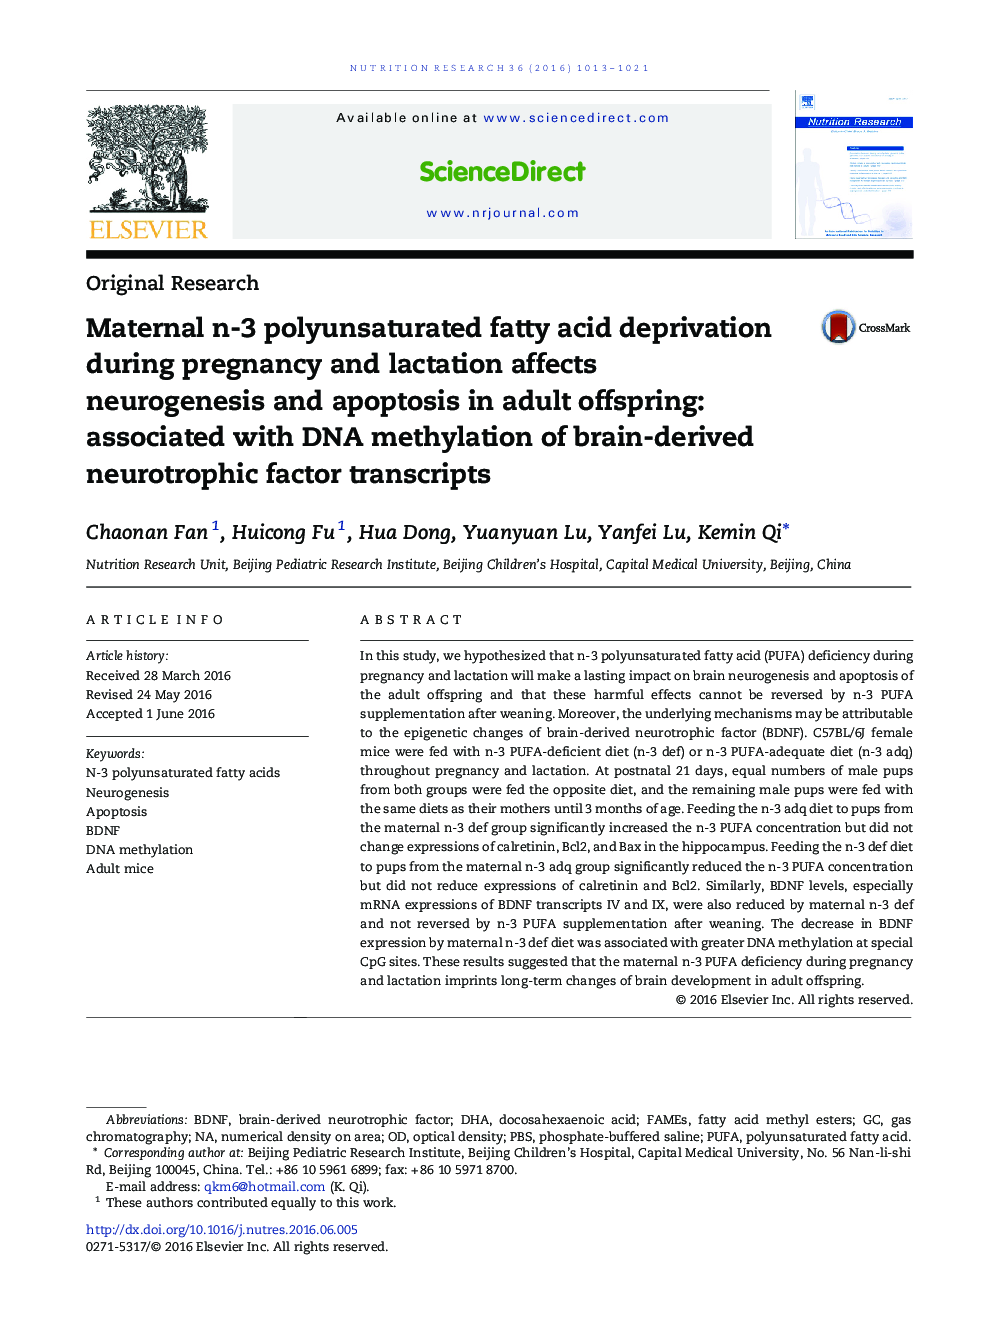 Maternal n-3 polyunsaturated fatty acid deprivation during pregnancy and lactation affects neurogenesis and apoptosis in adult offspring: associated with DNA methylation of brain-derived neurotrophic factor transcripts